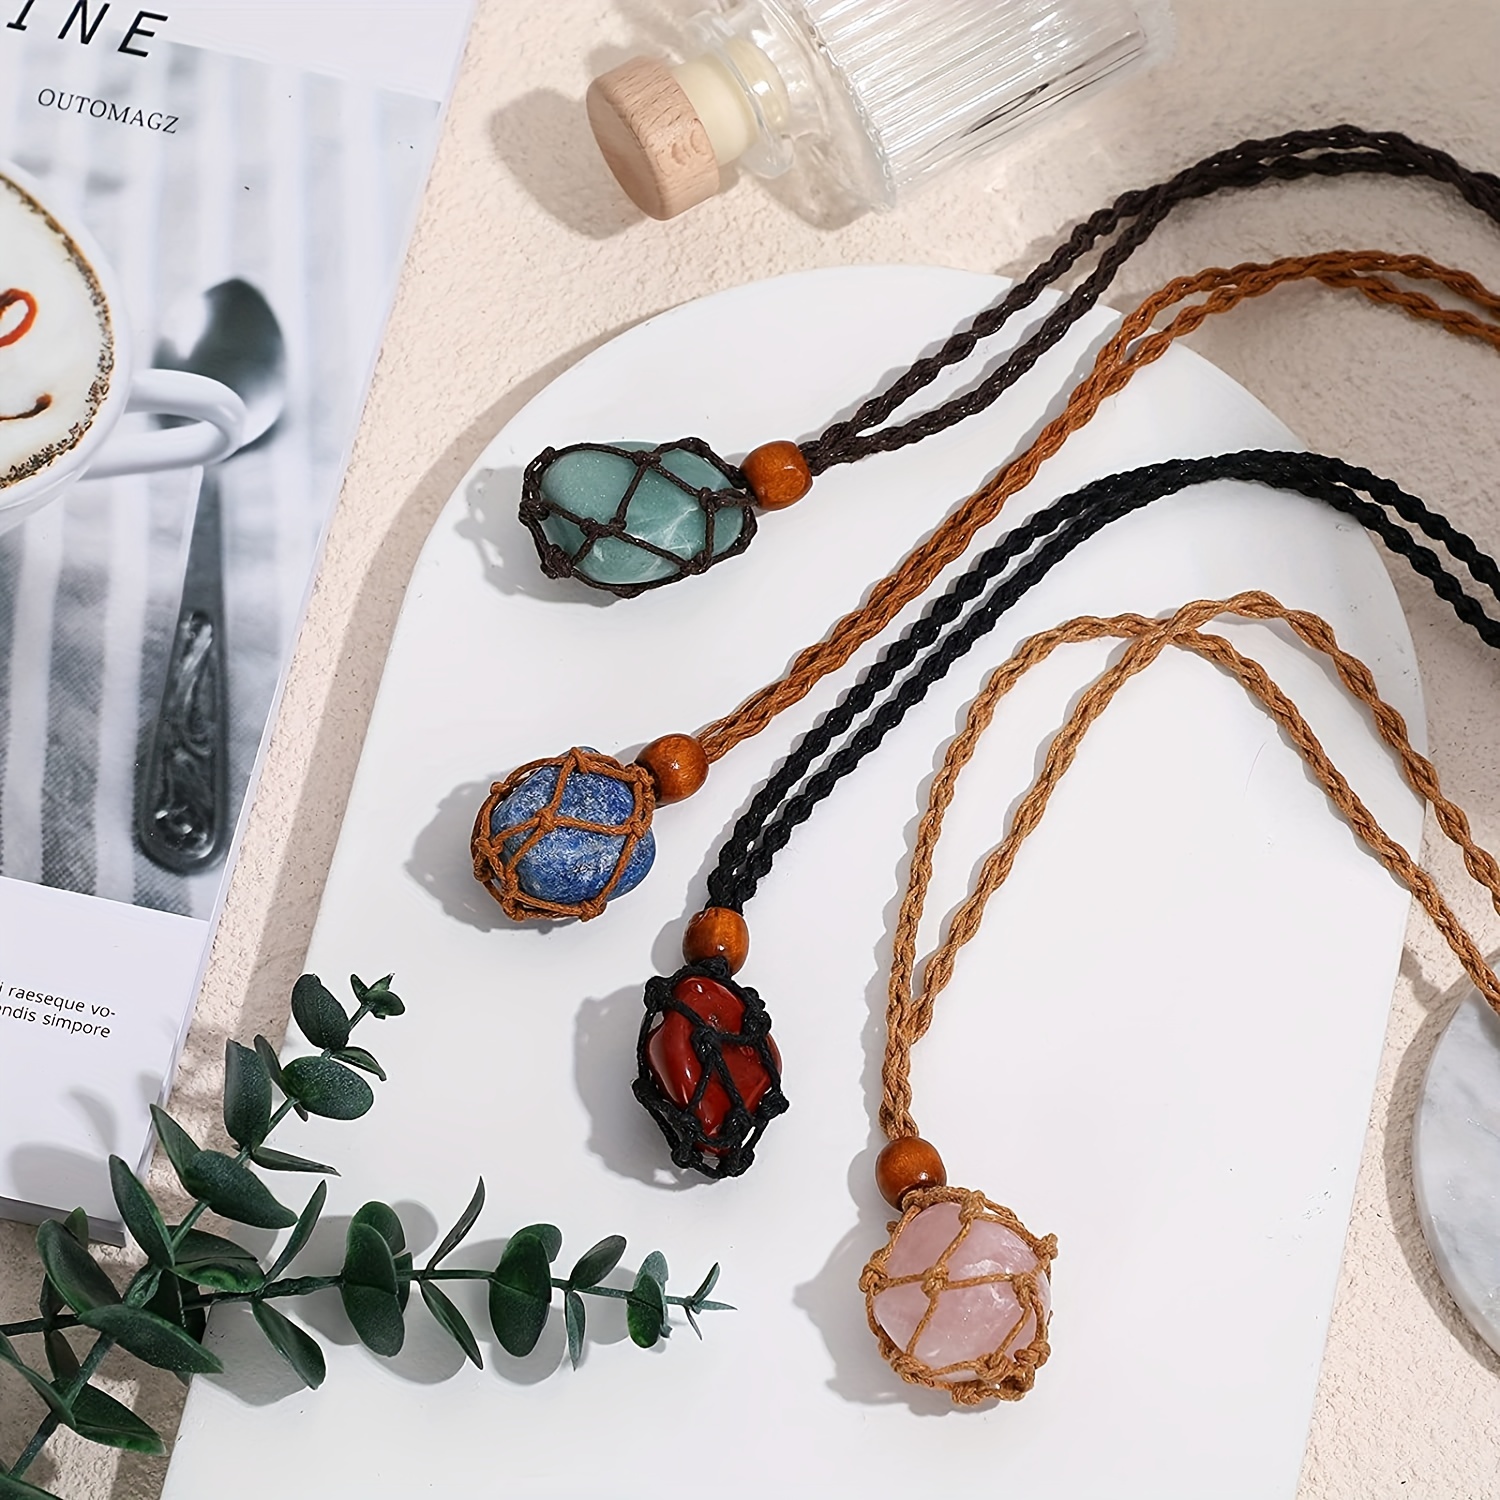 1 Pcs Necklace Crystal Holder Necklace Cord Empty Stone Pendant Necklace  Cage Cord Diy Necklace Jewelry Adjustable Rope